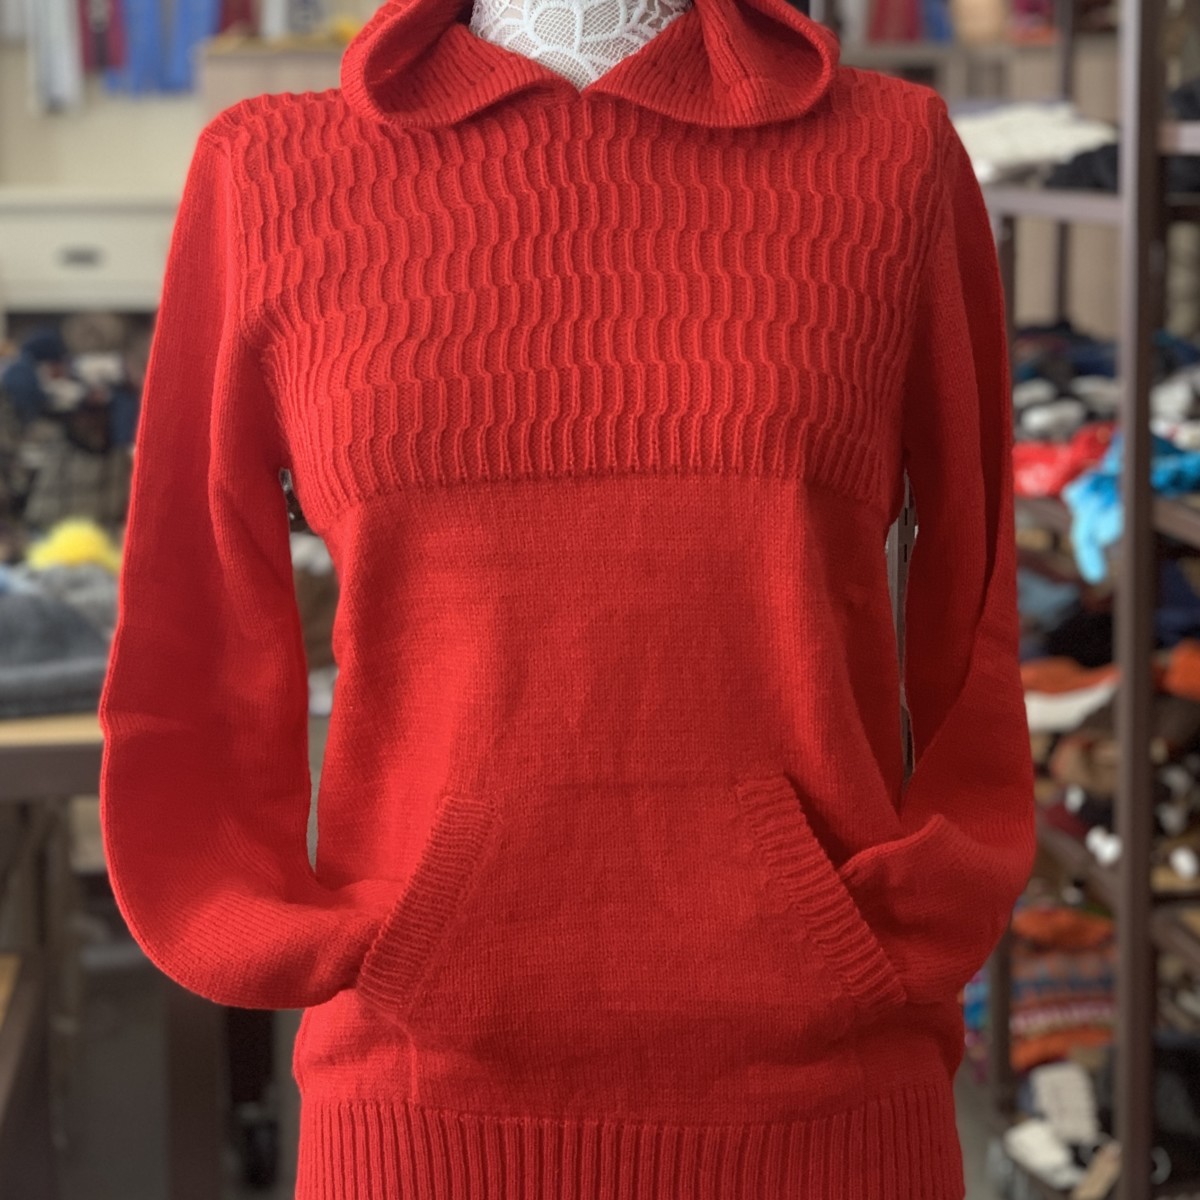 Ladies Hooded Sweater in Red